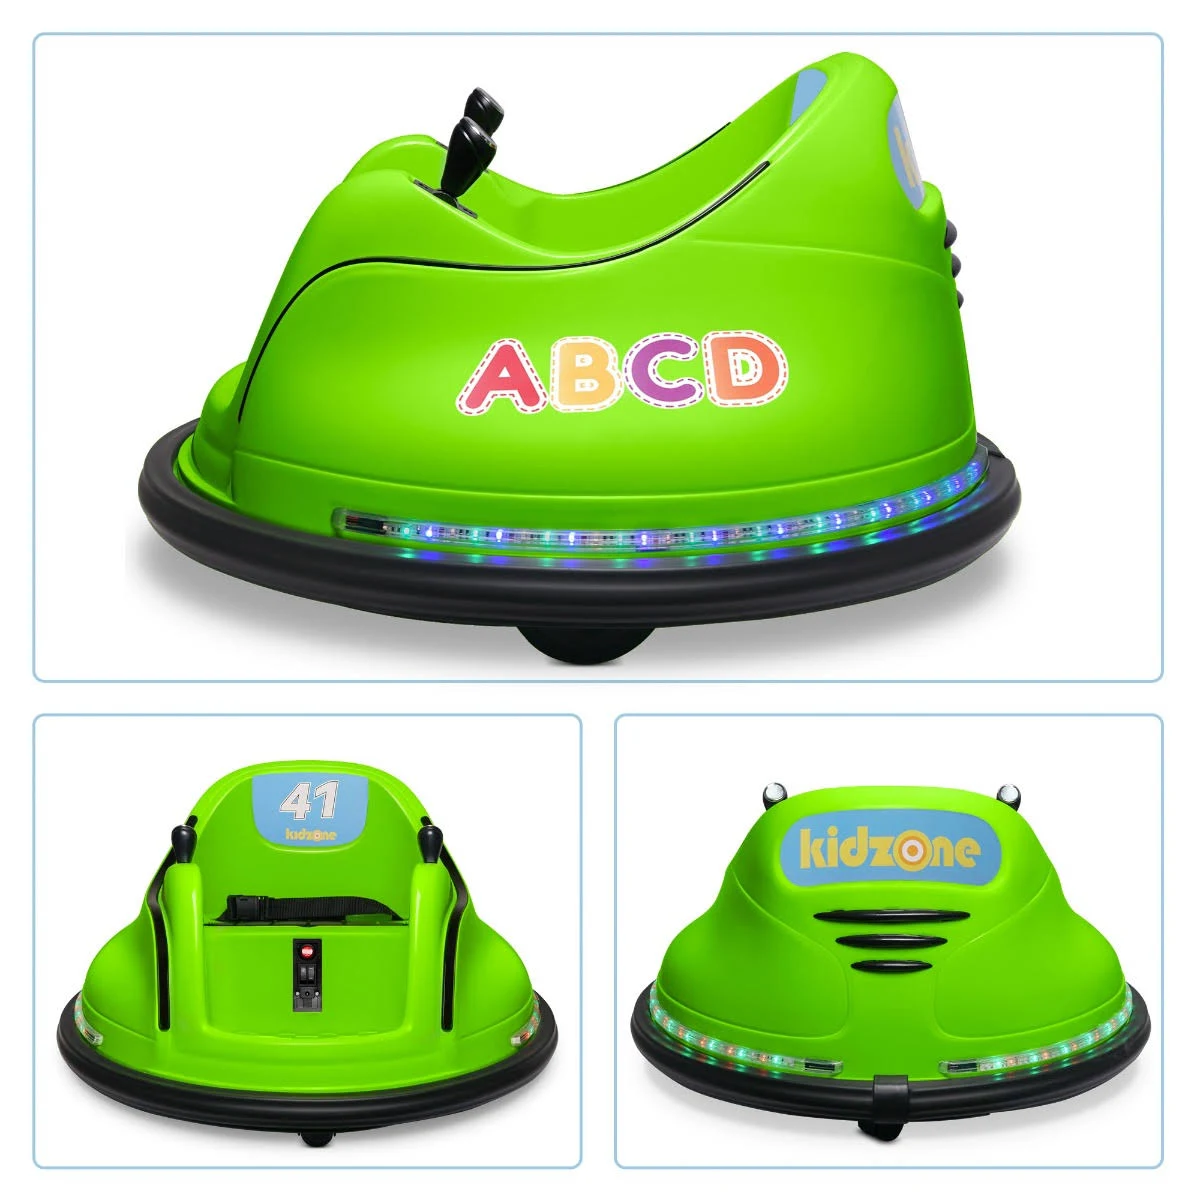 Kidzone DIY Number Kids Toy Electric Ride on Bumper Car Vehicle Remote Control 360 Spin ASTM-Certified 1.5-6 Years, Size: 12V, Green